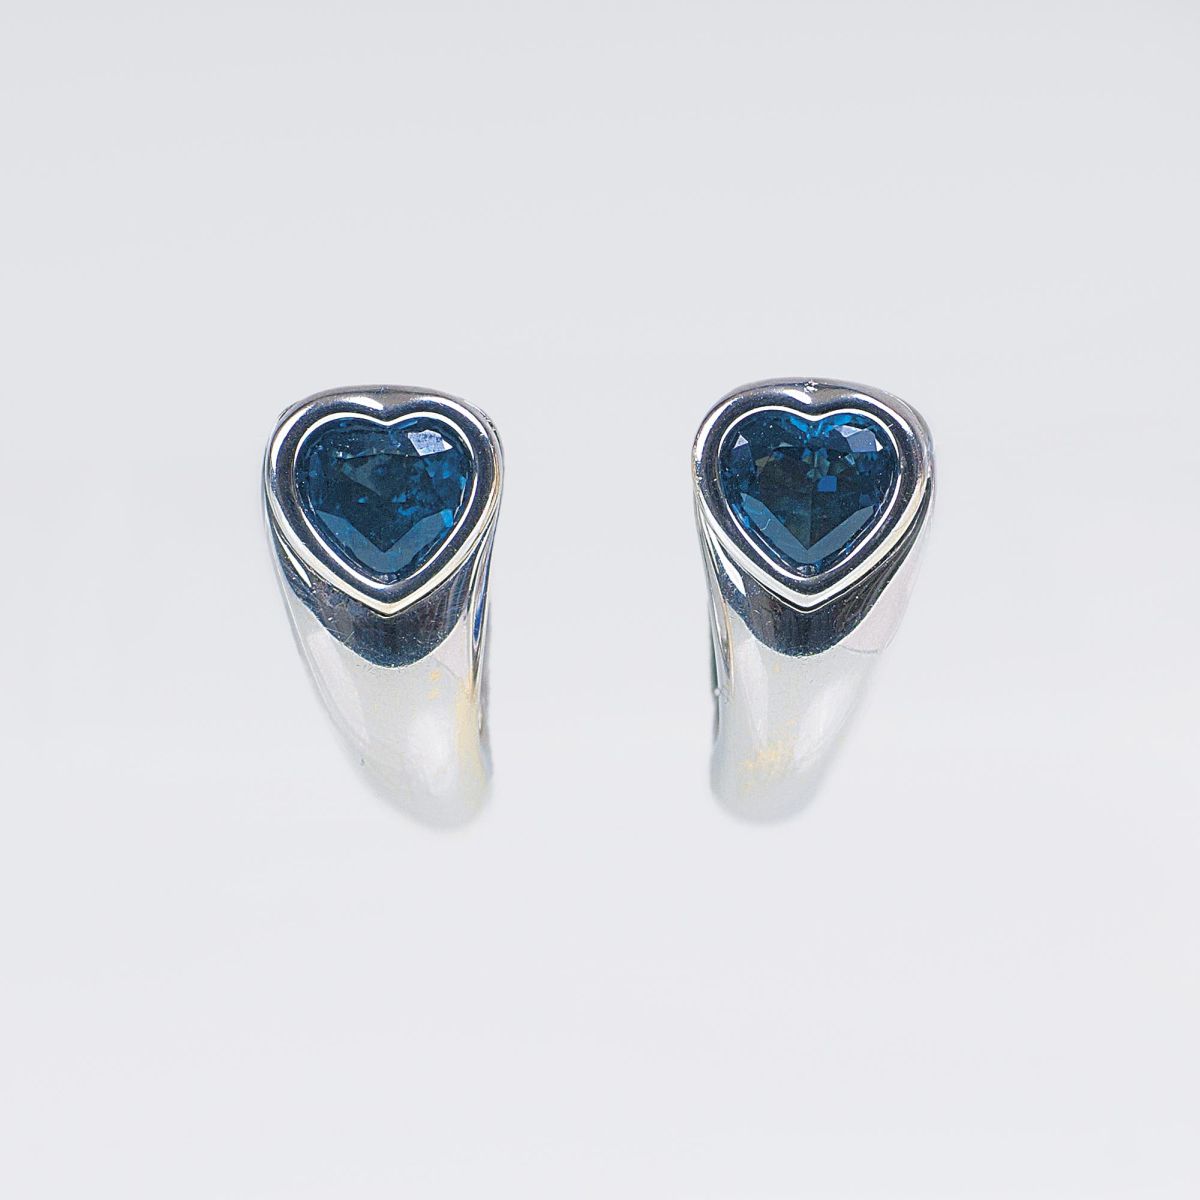 A Pair of Earrings with Topaz Hearts